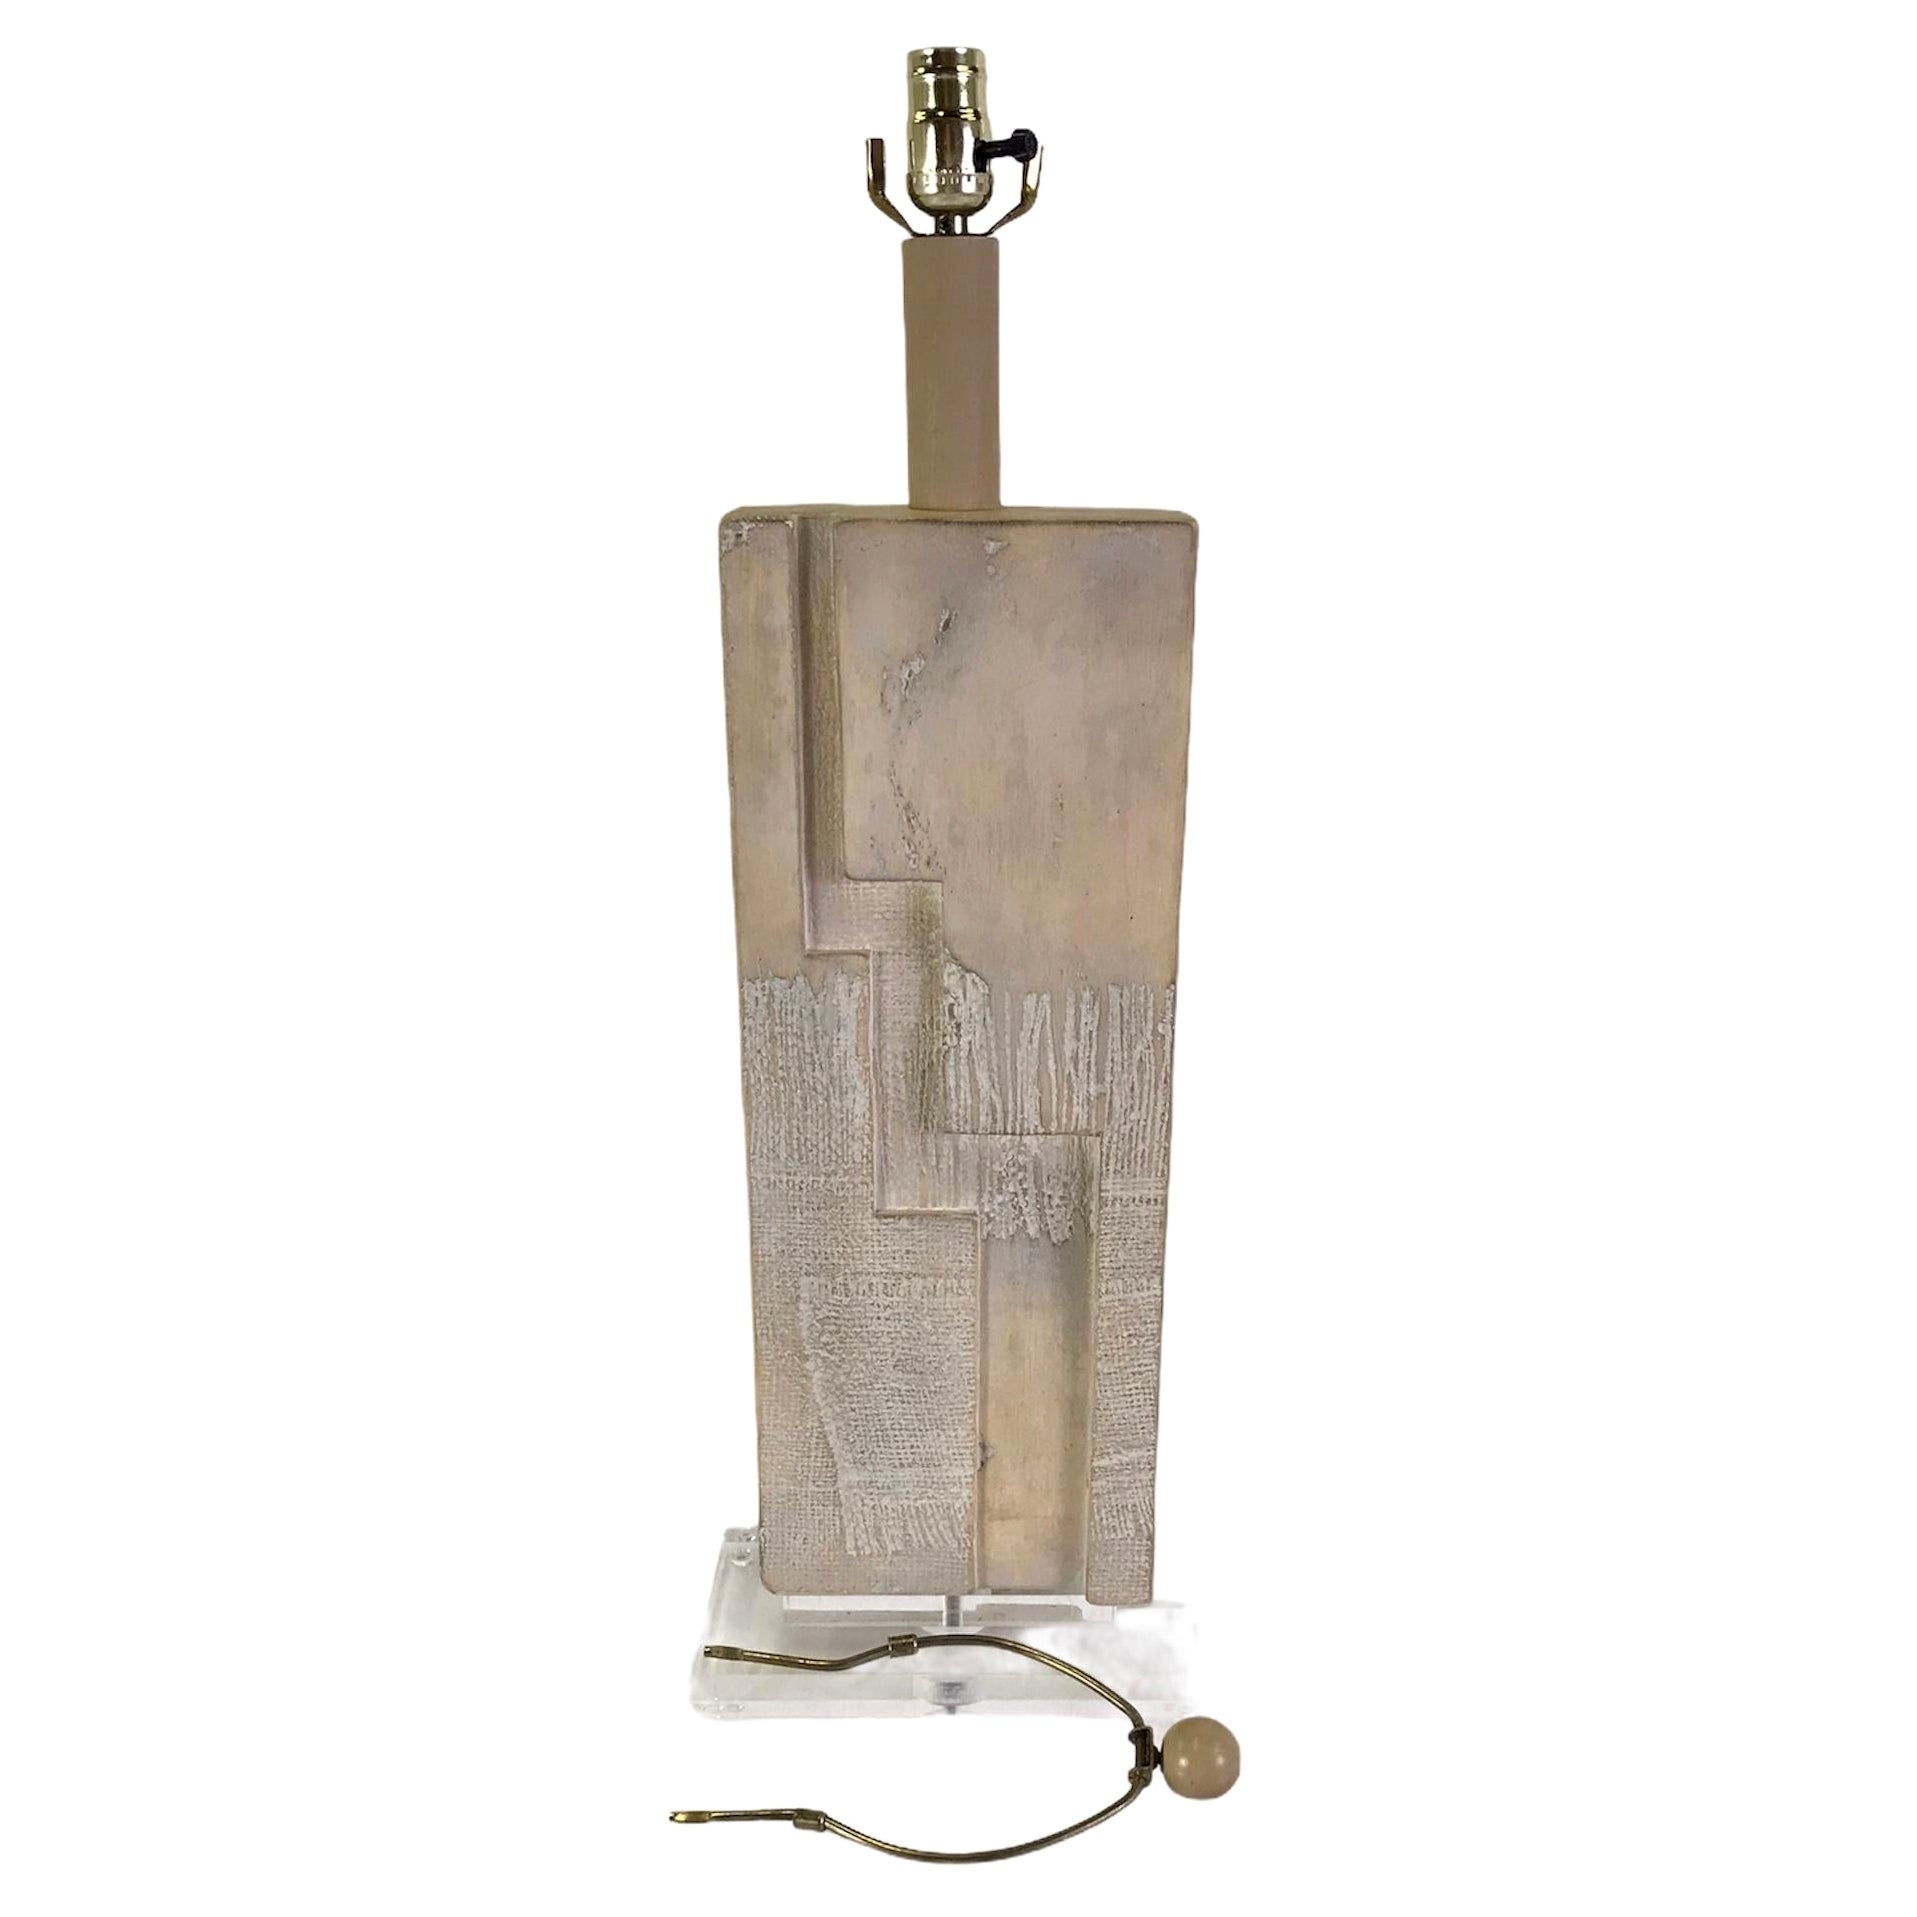 1988, Casual Lamps of California Brutalist Modern Lucite Plinth Table Lamp